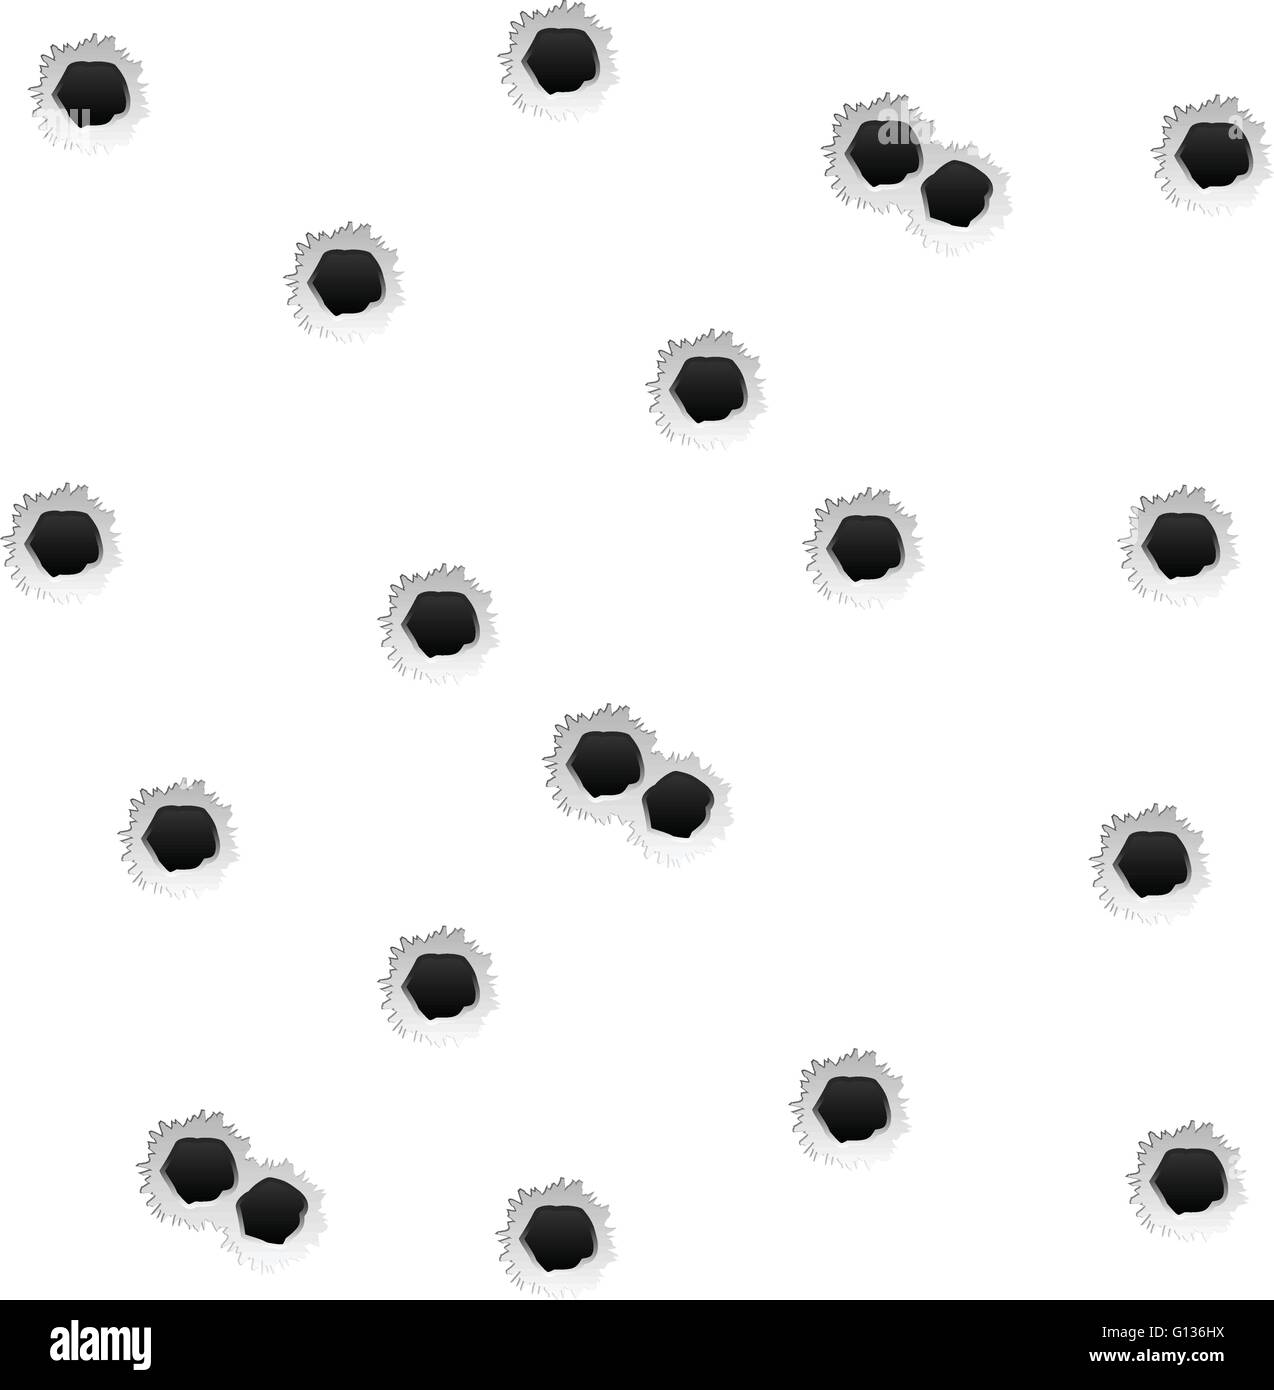 Bullet holes on a white background. Stock Vector